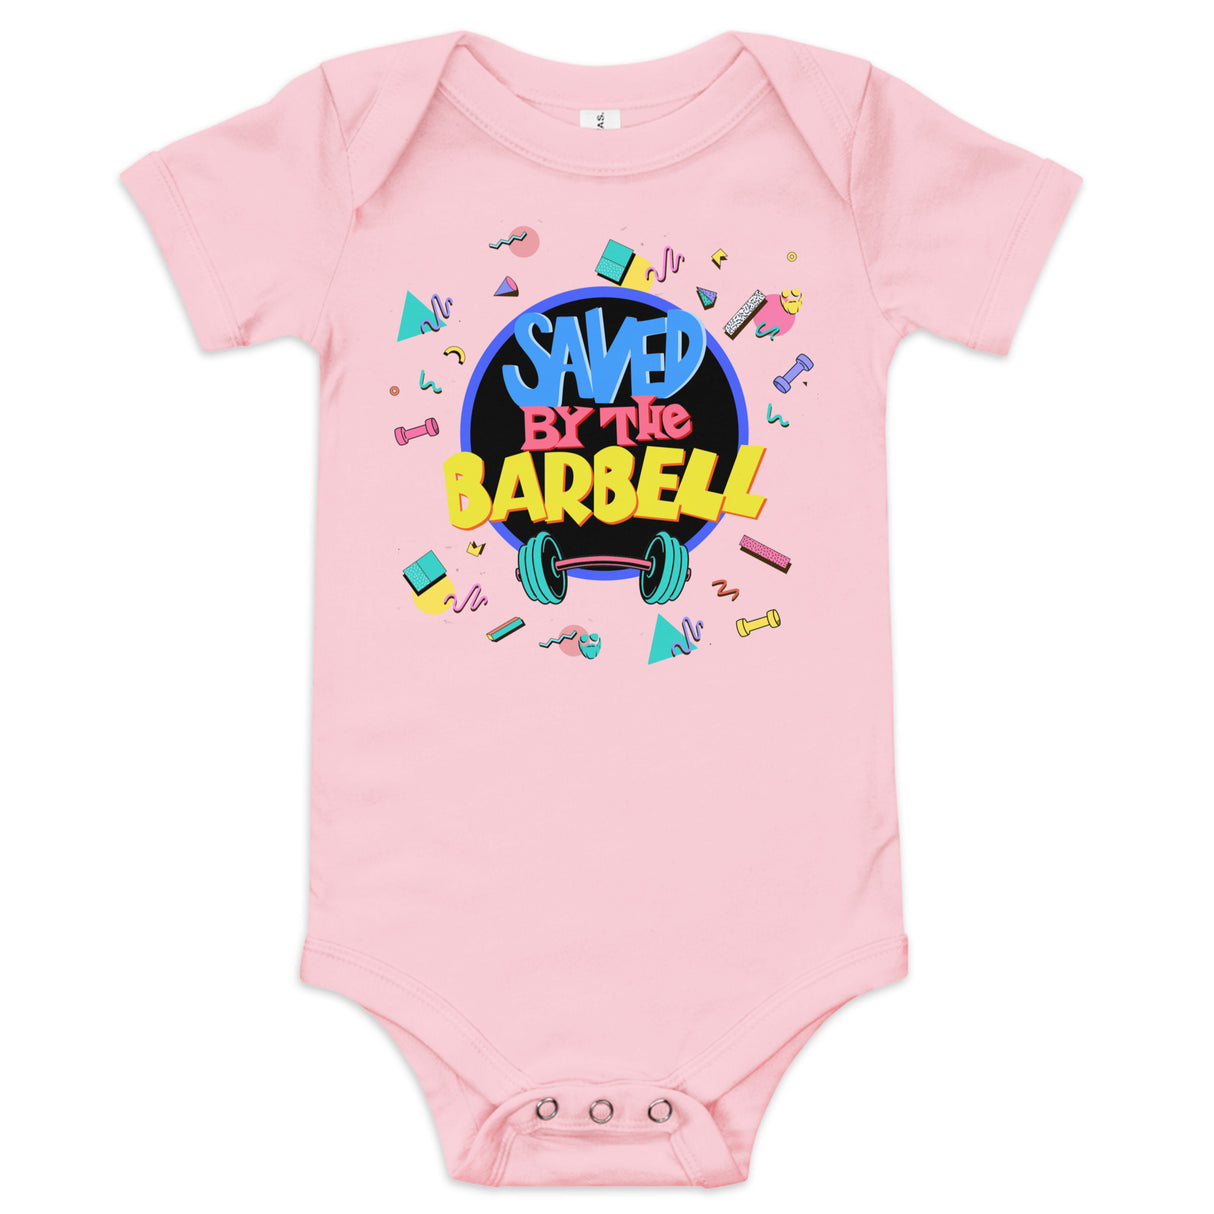 Saved By The Barbell Baby Onesie